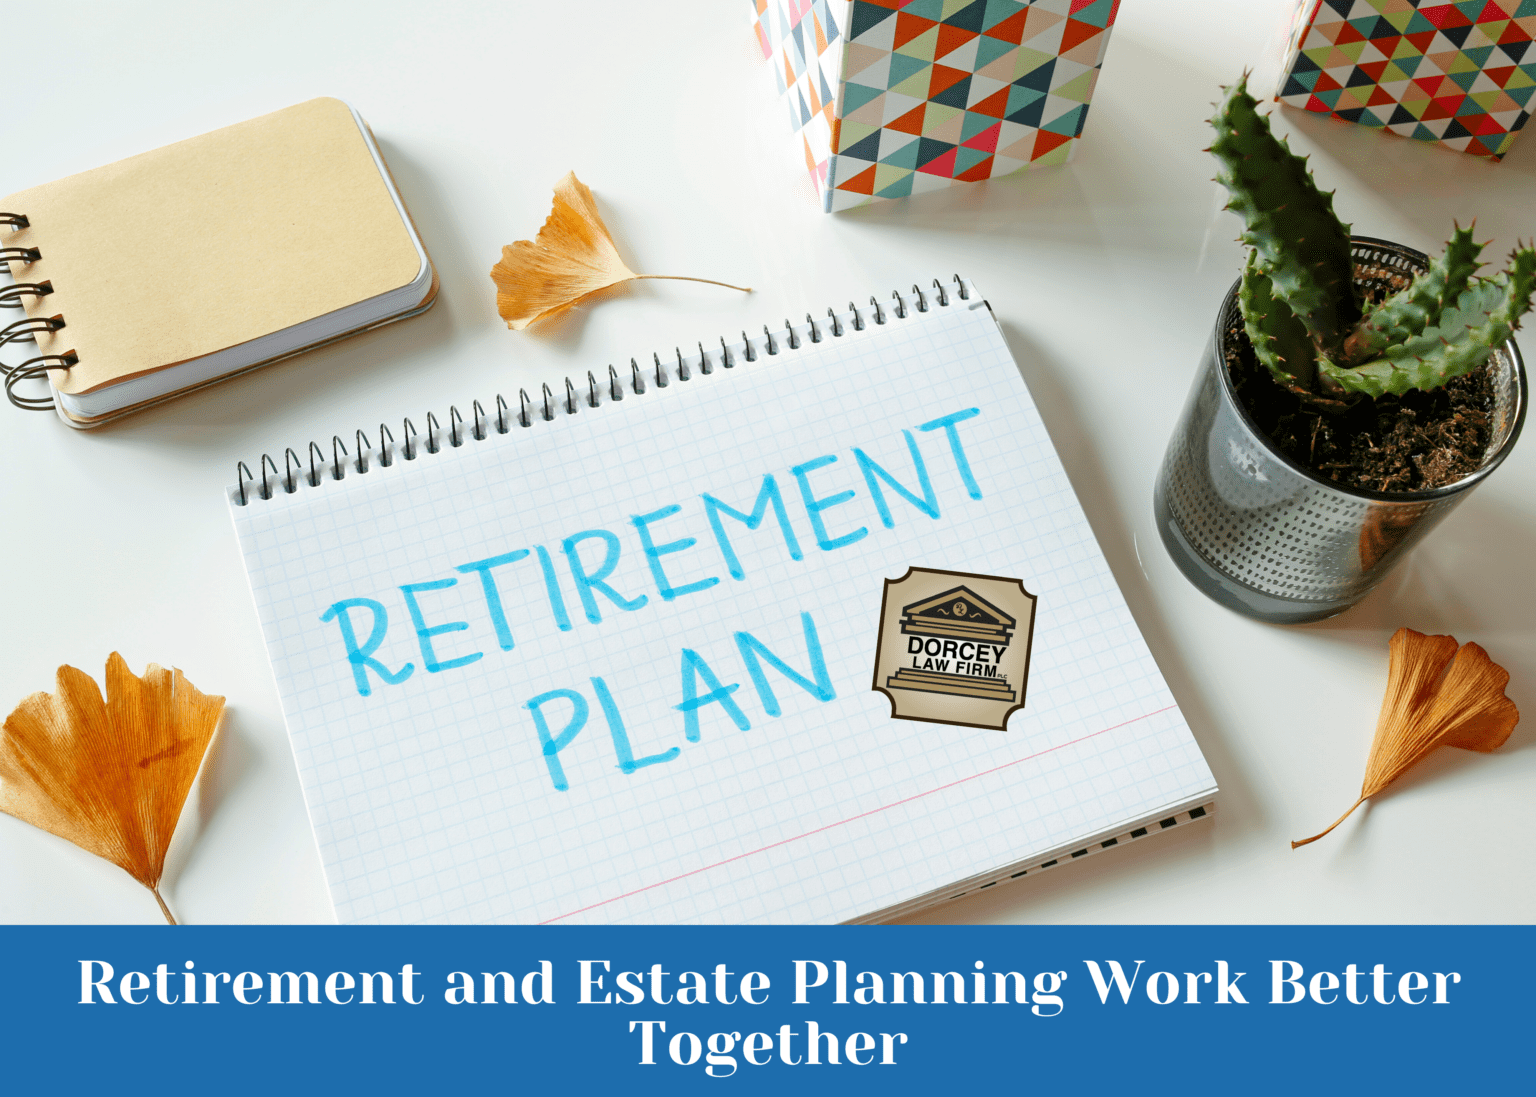 Retirement and Estate Planning Work Better Together